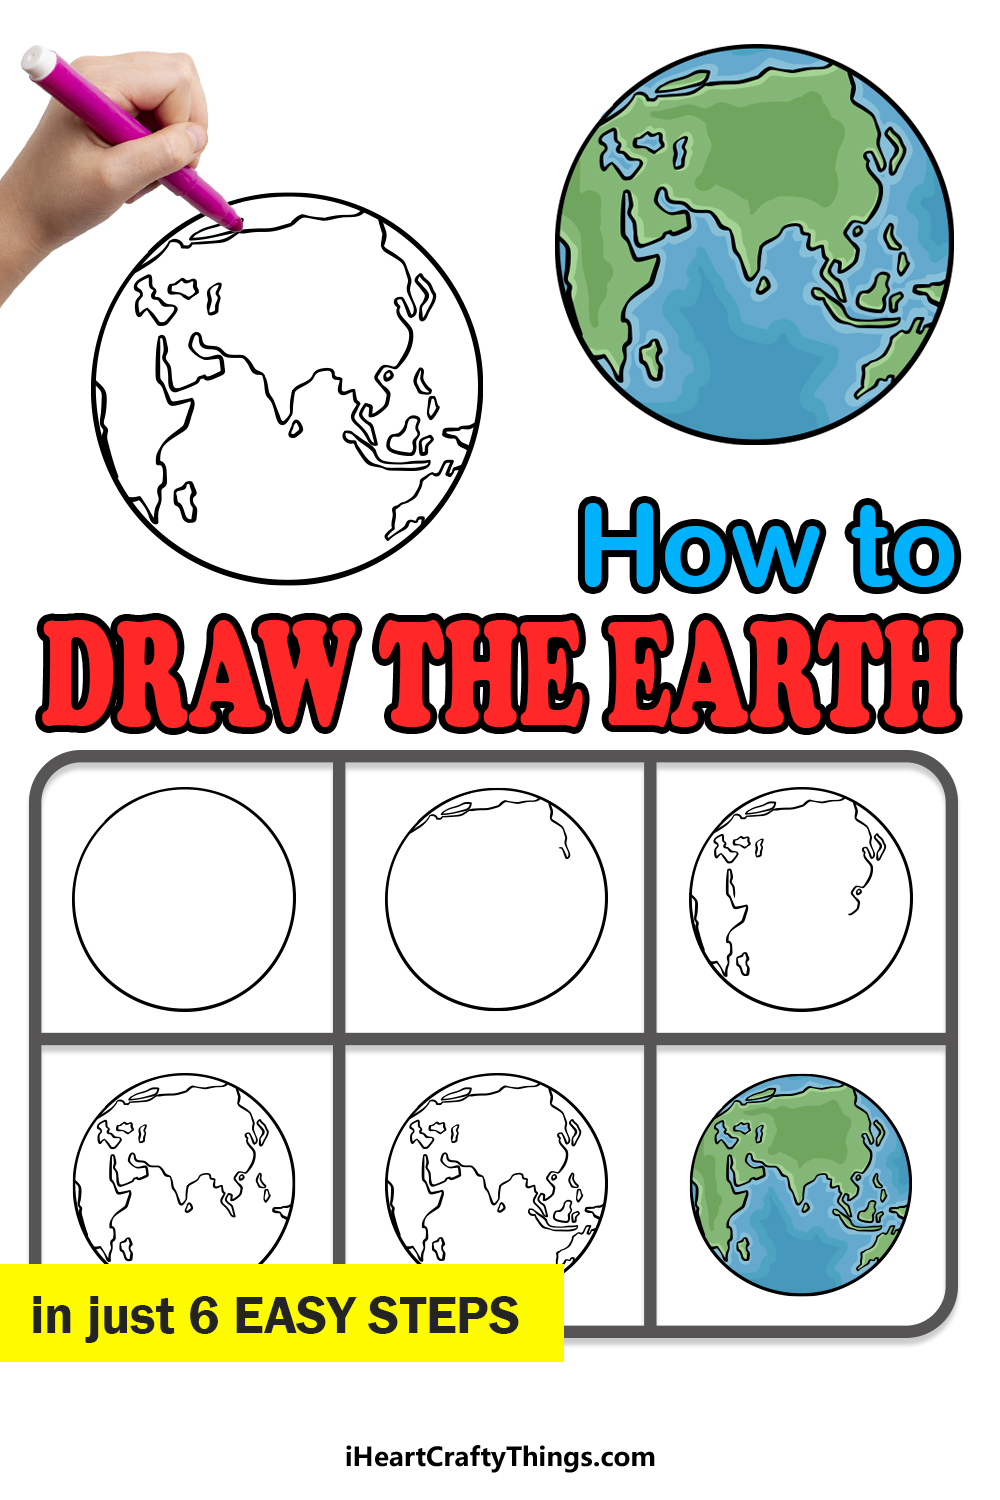 How to Draw The Earth in 6 easy steps